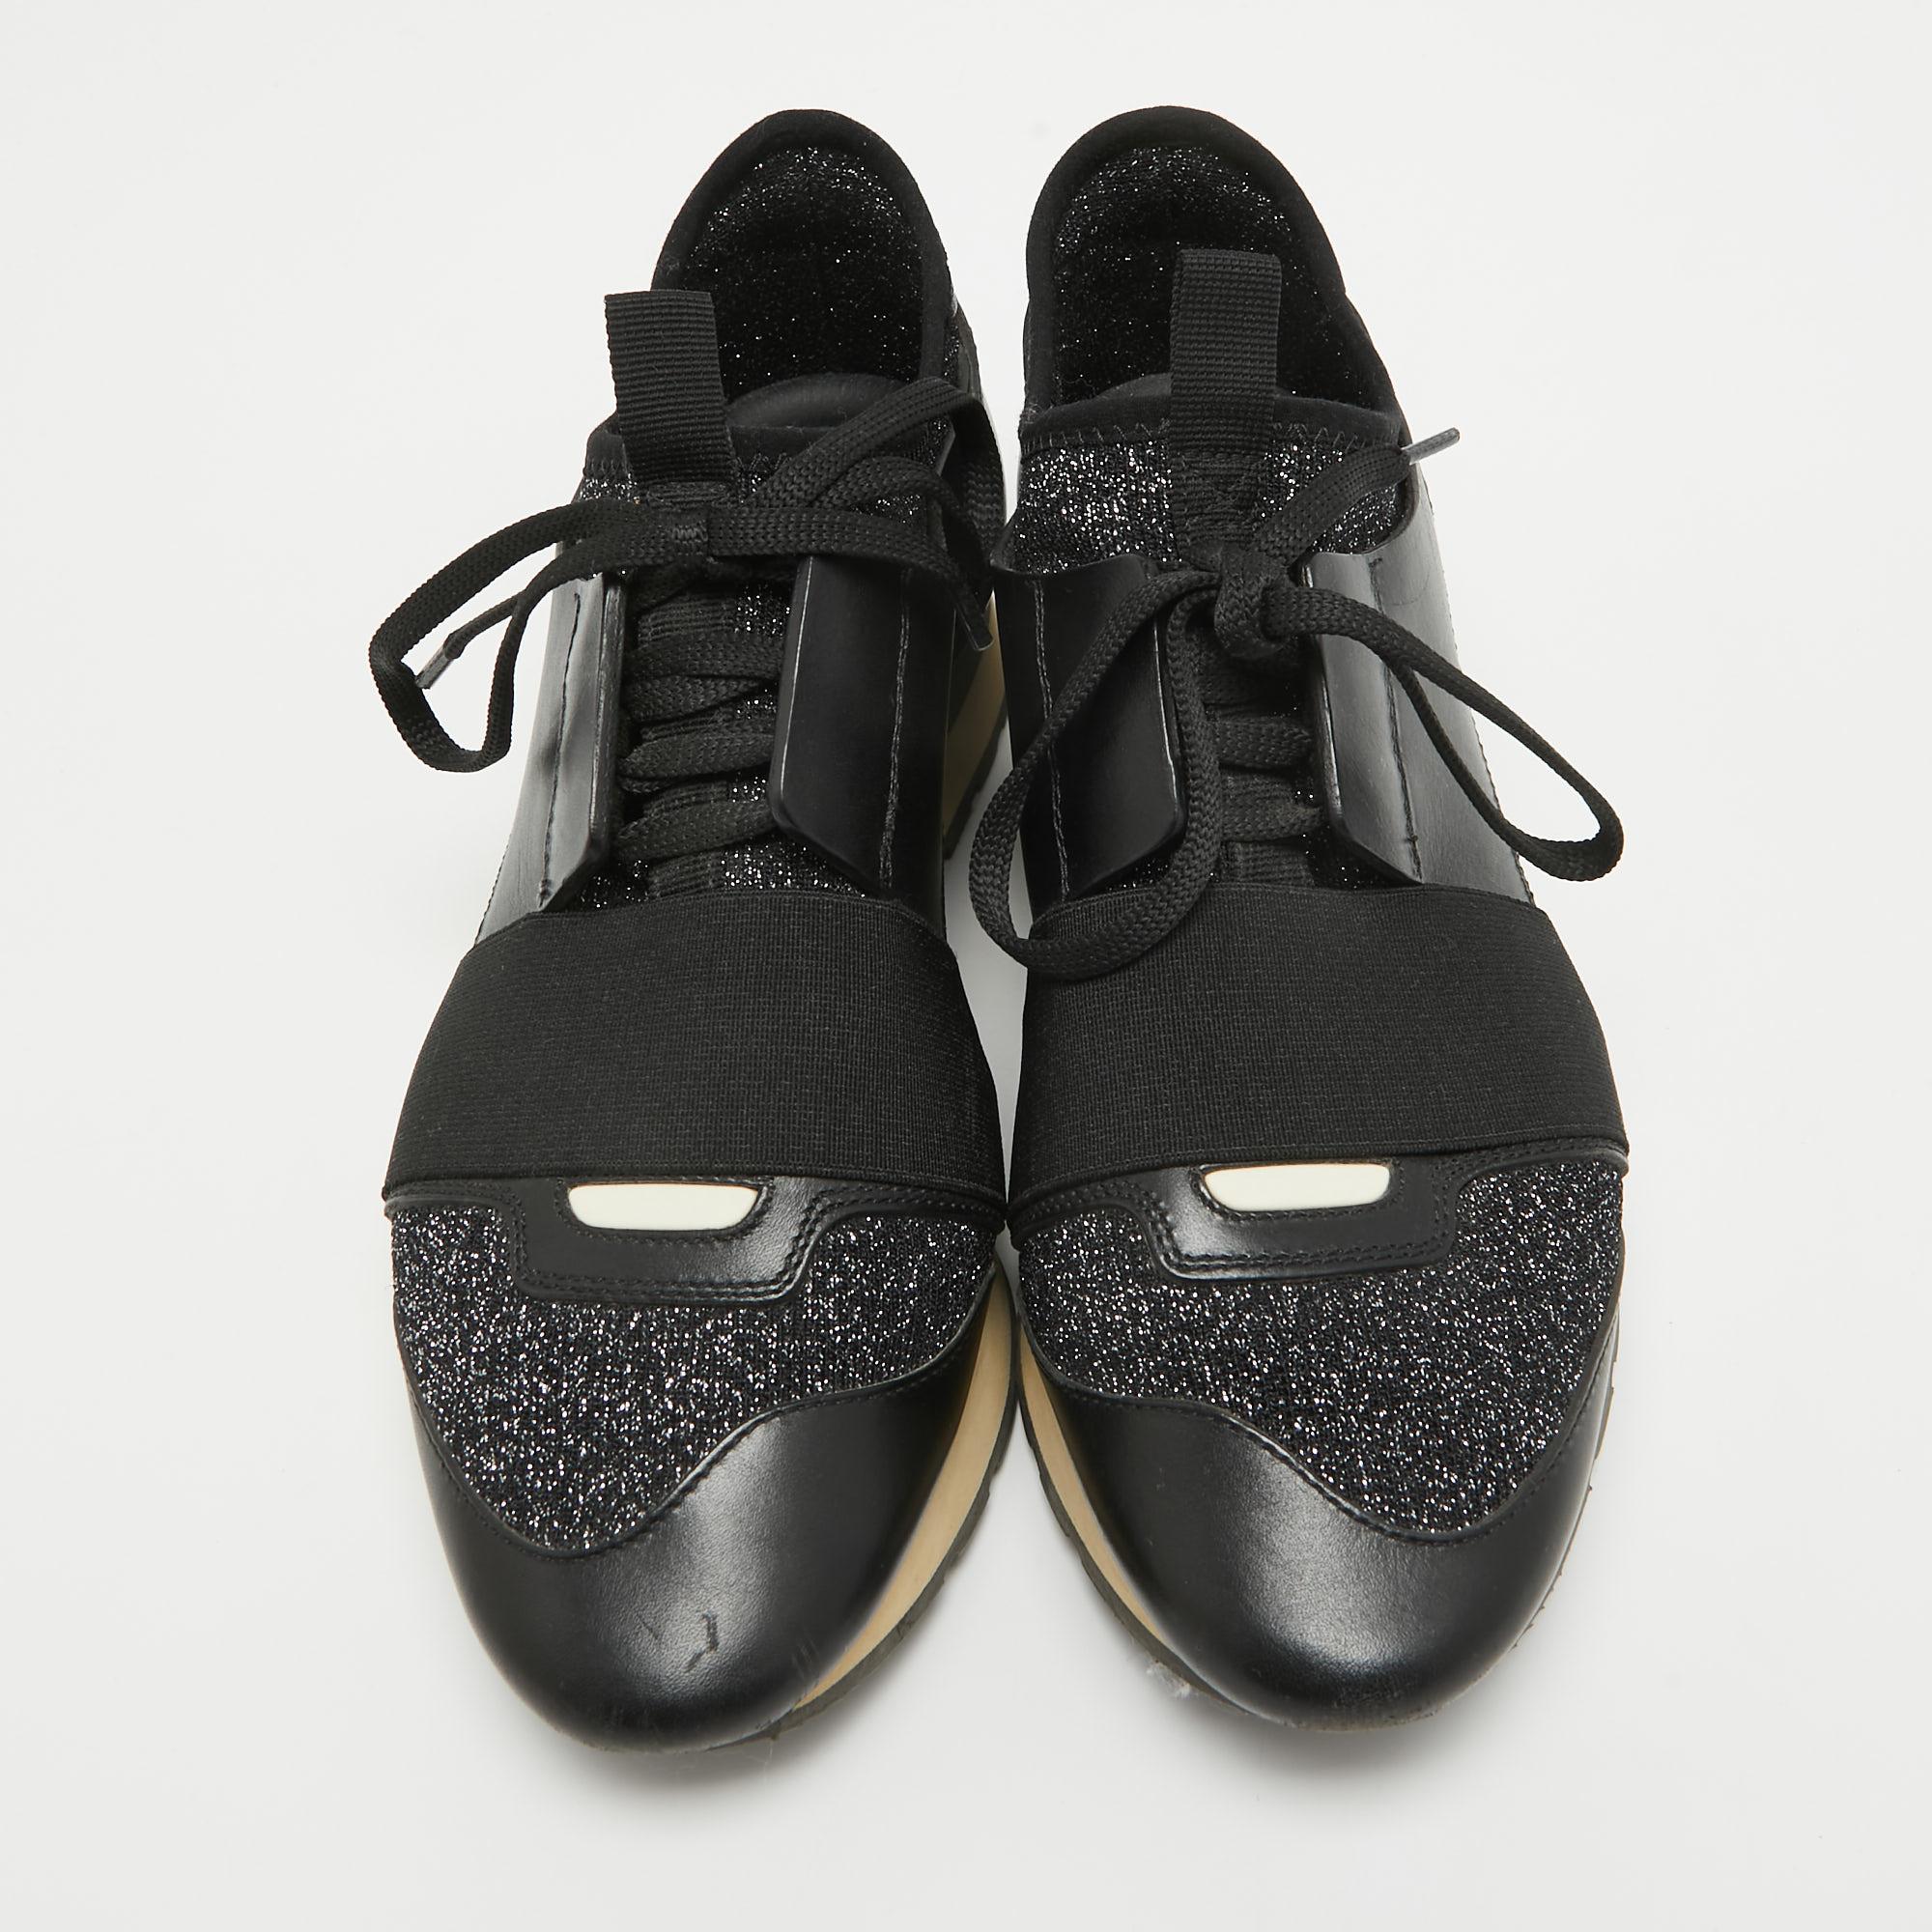 Balenciaga Black Leather and Glitter Knit Fabric Race Runner Sneakers Size 37 For Sale 1